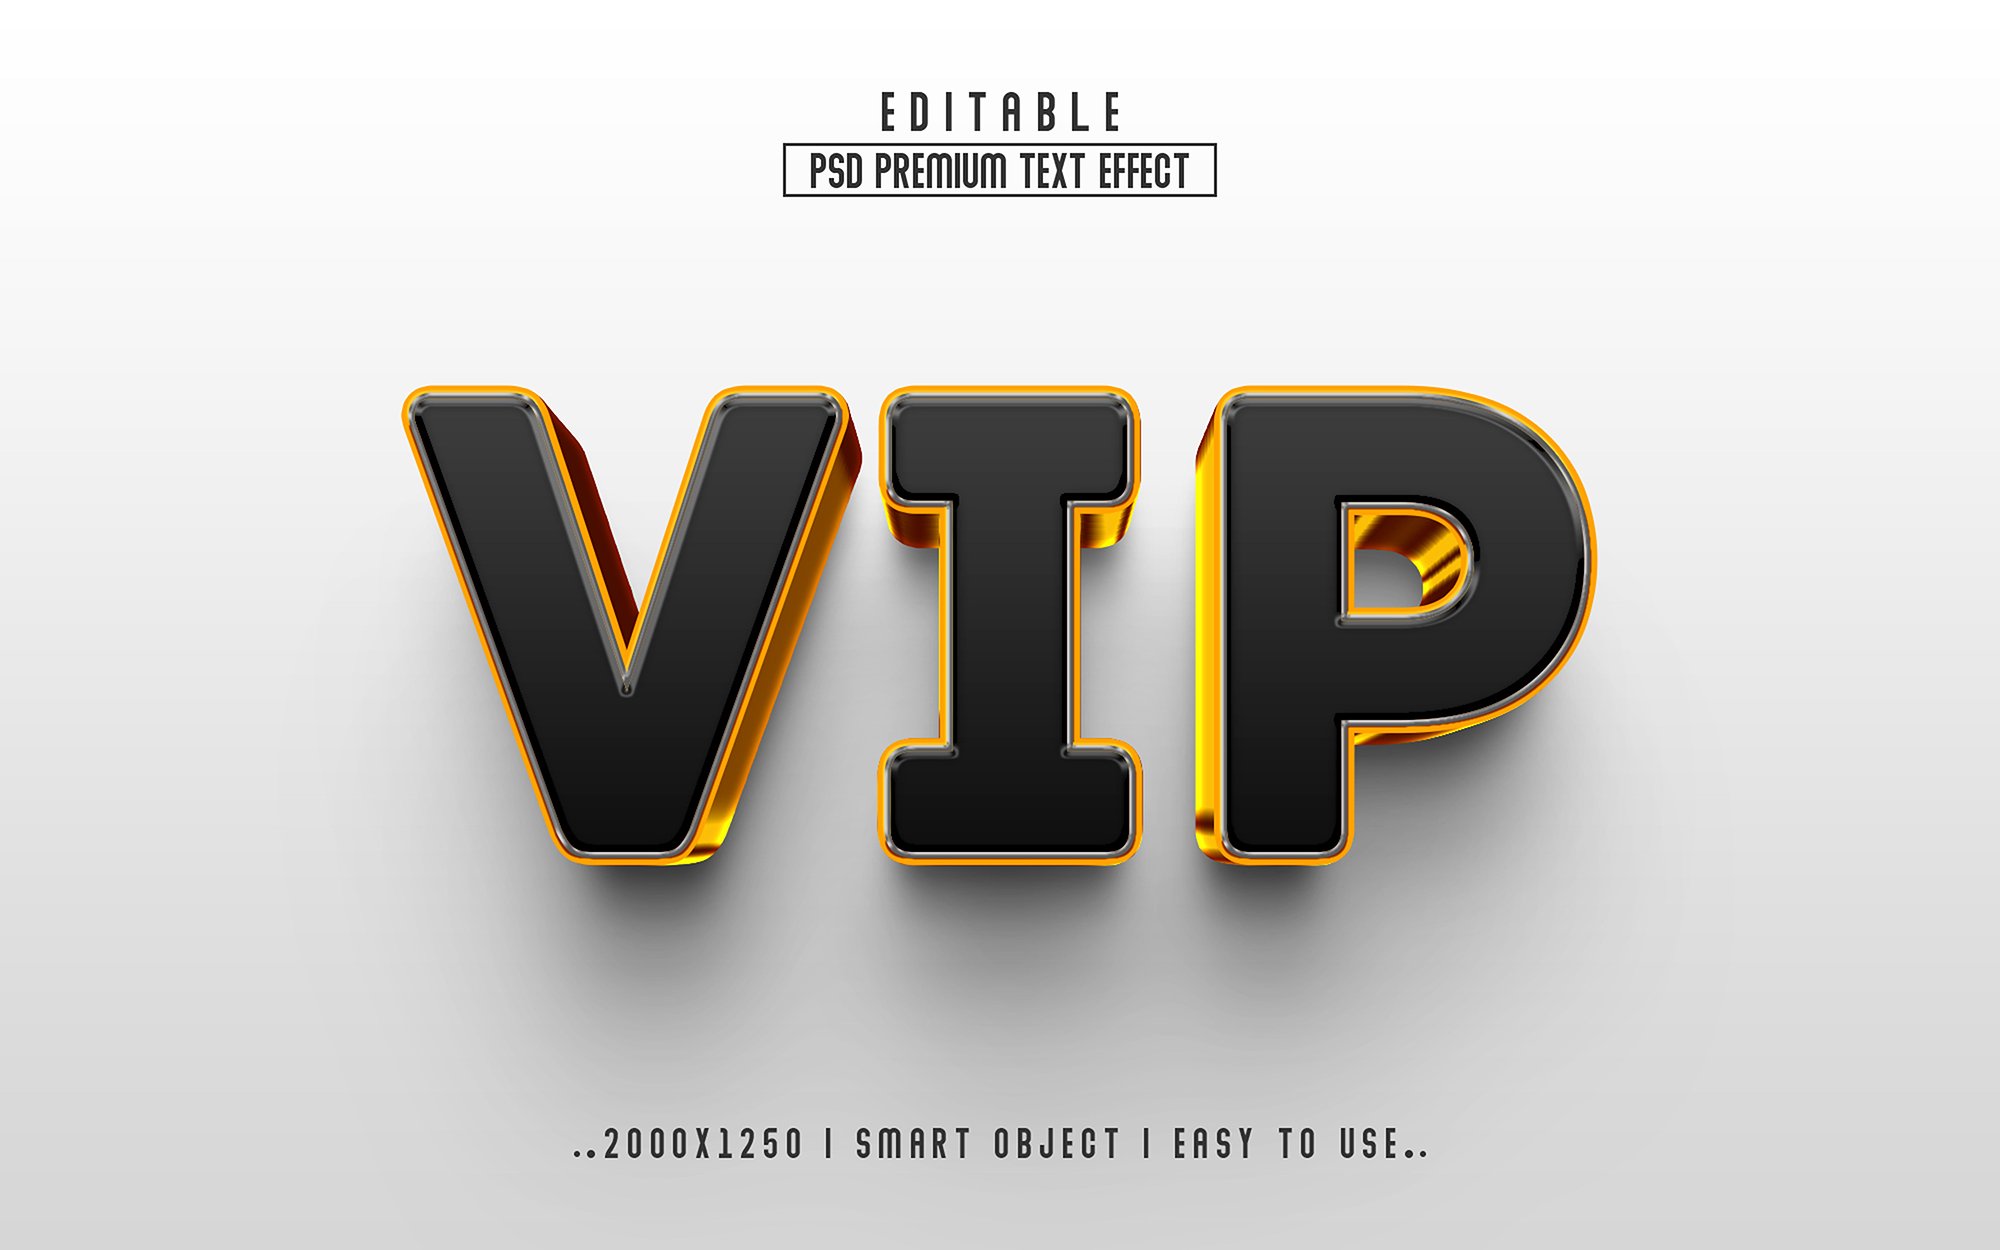 VIP 3D Editable Text Effect stylecover image.